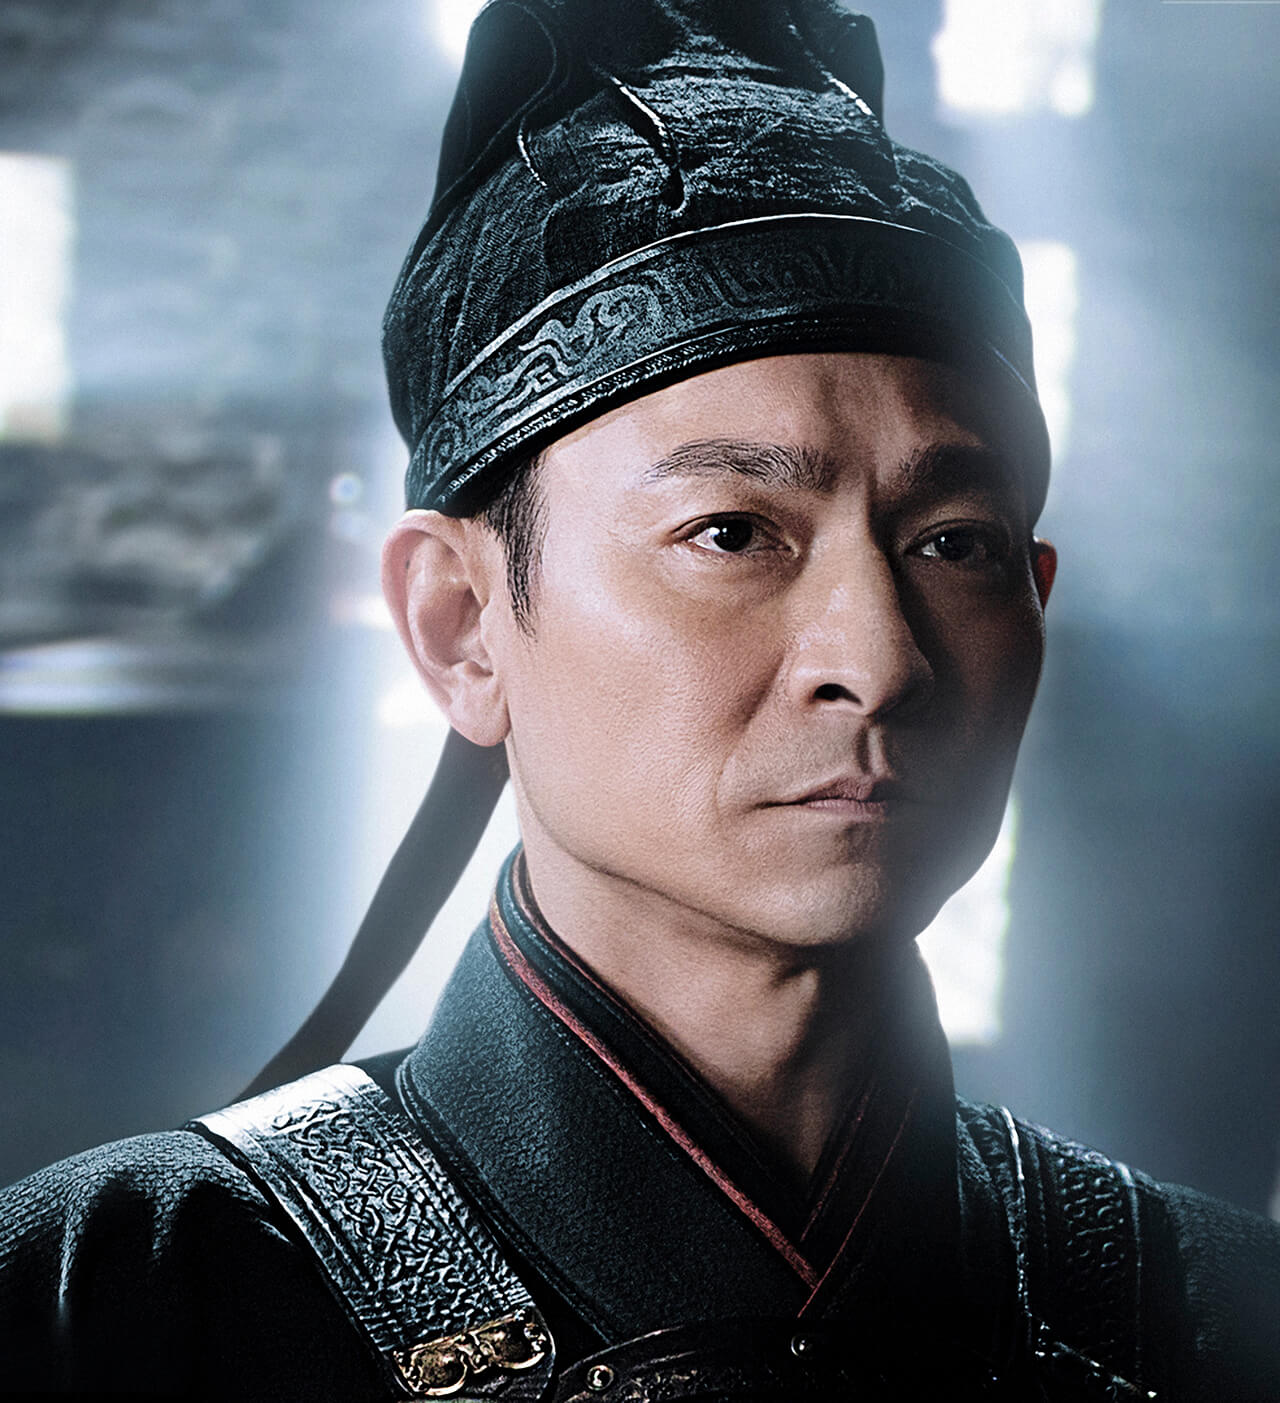 Andy Lau The Great Wall.jpg